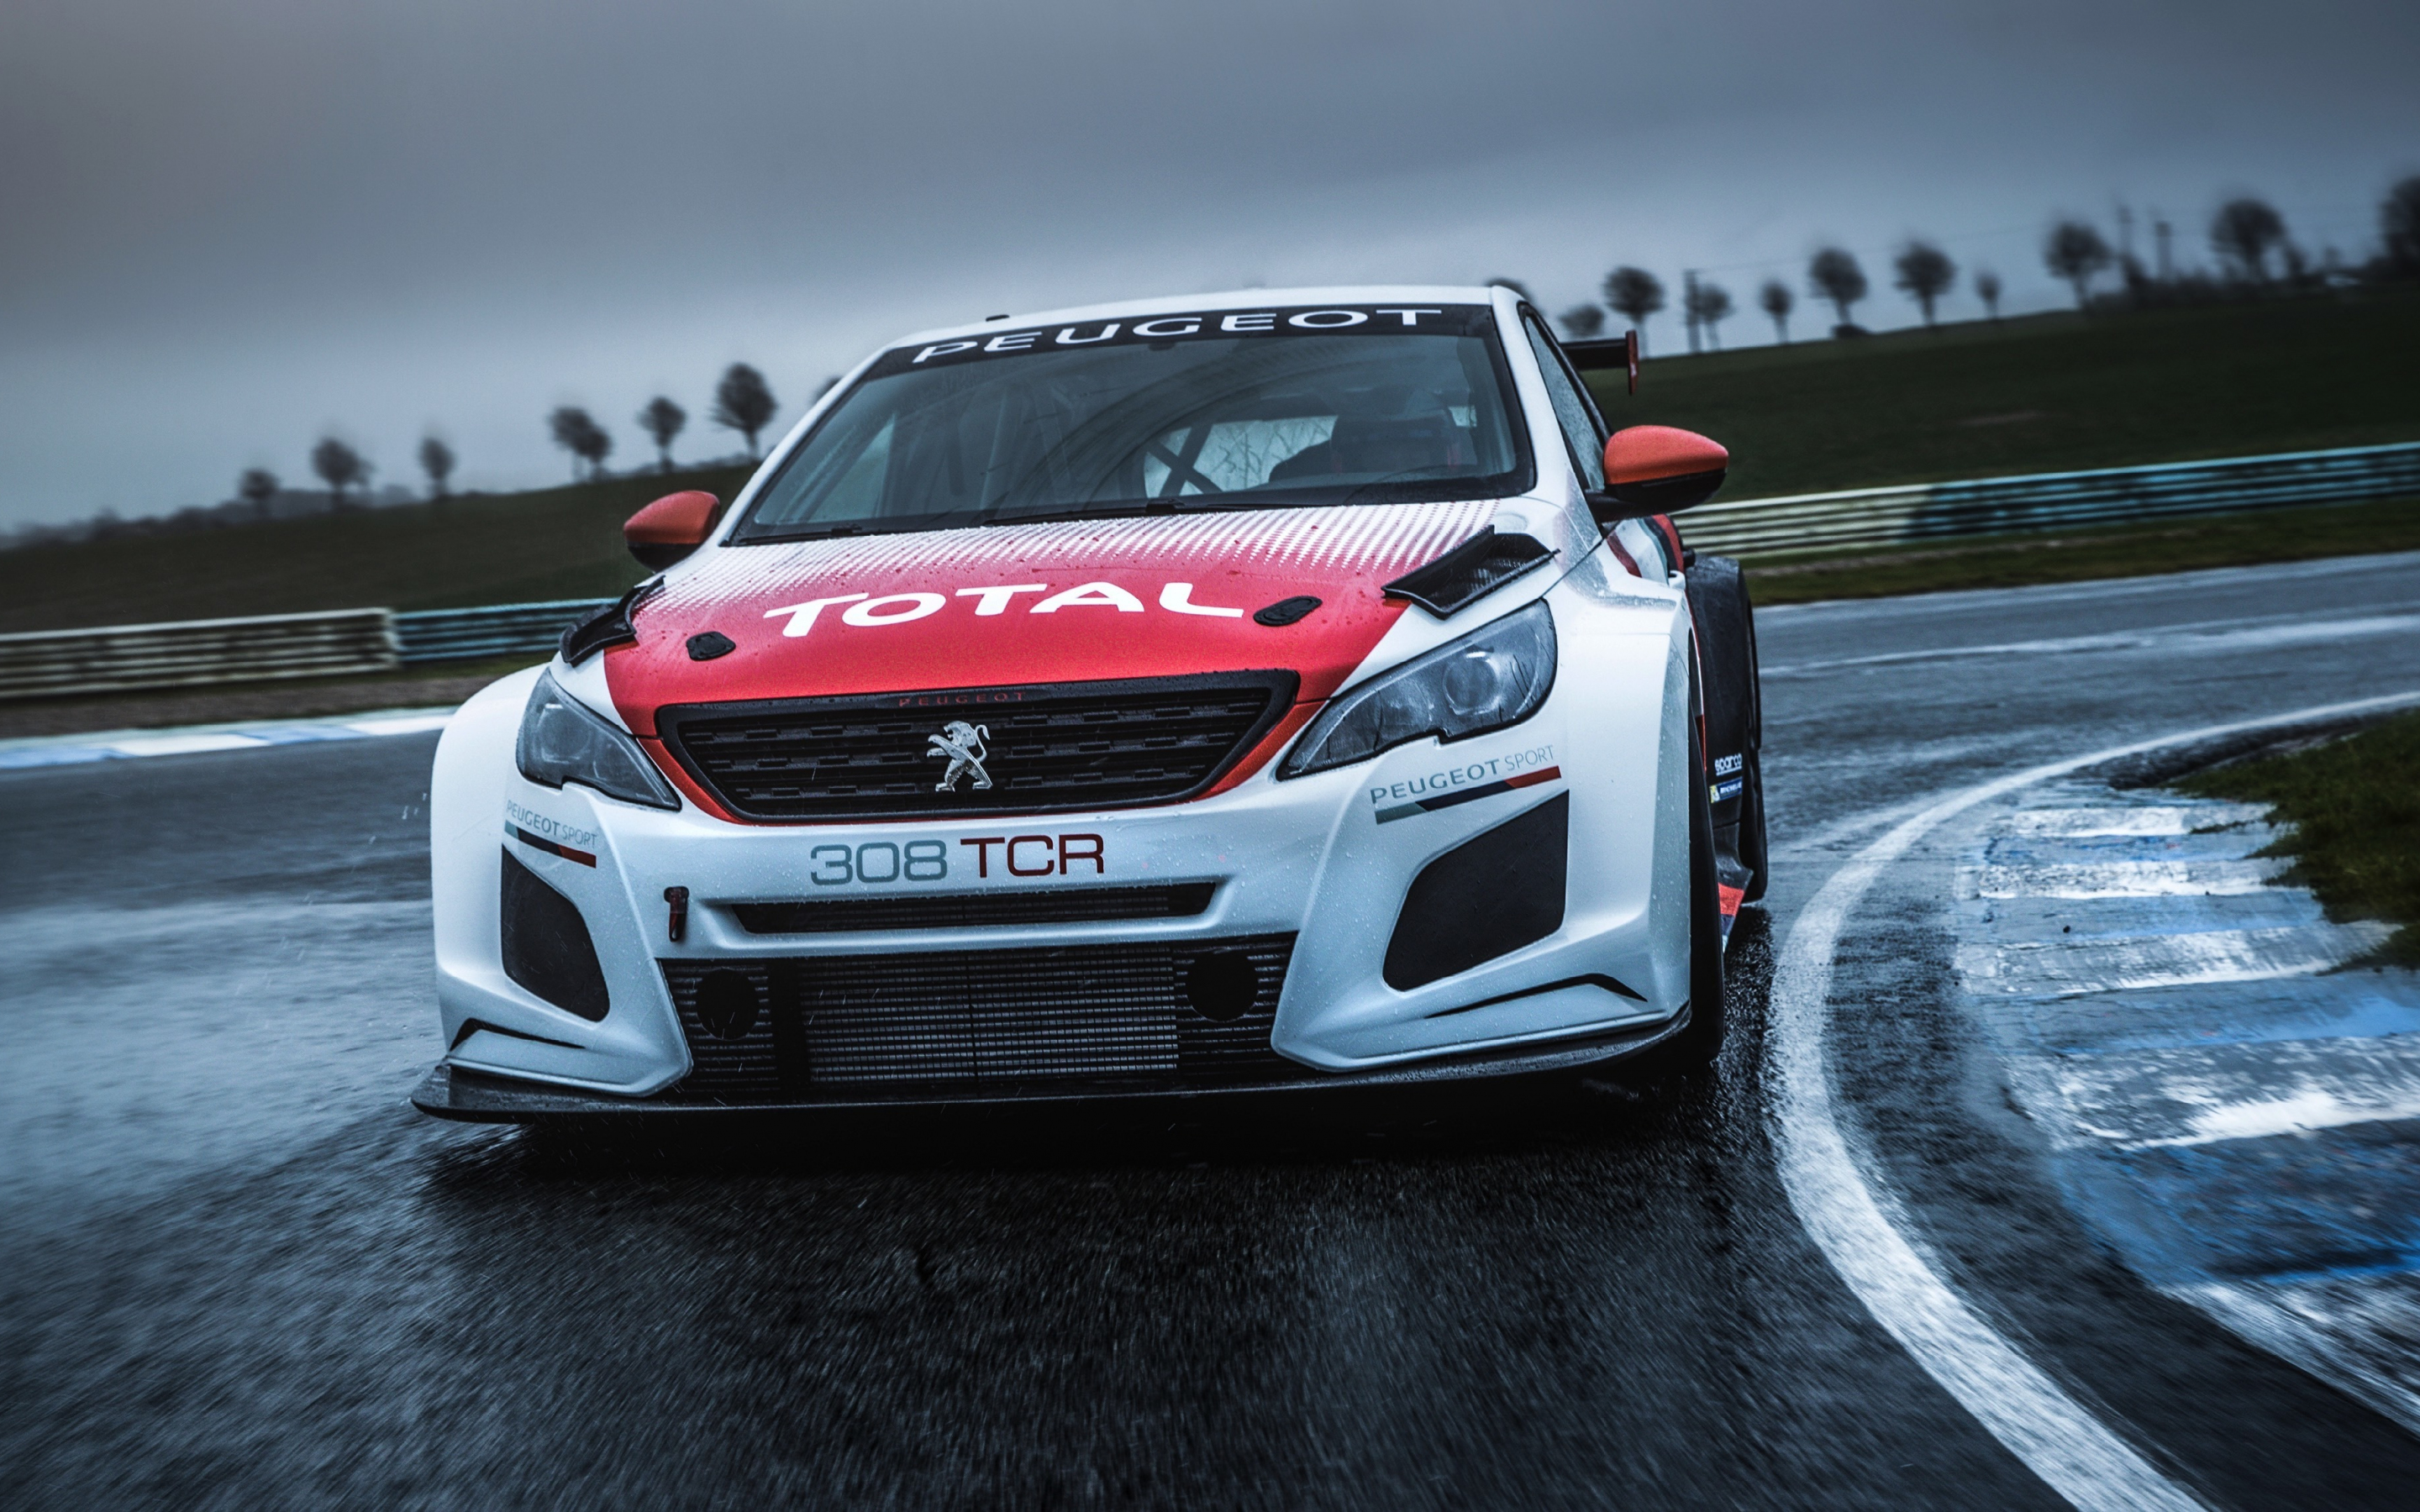 2018 Peugeot 308 TCR, front, on road, 2880x1800 wallpaper